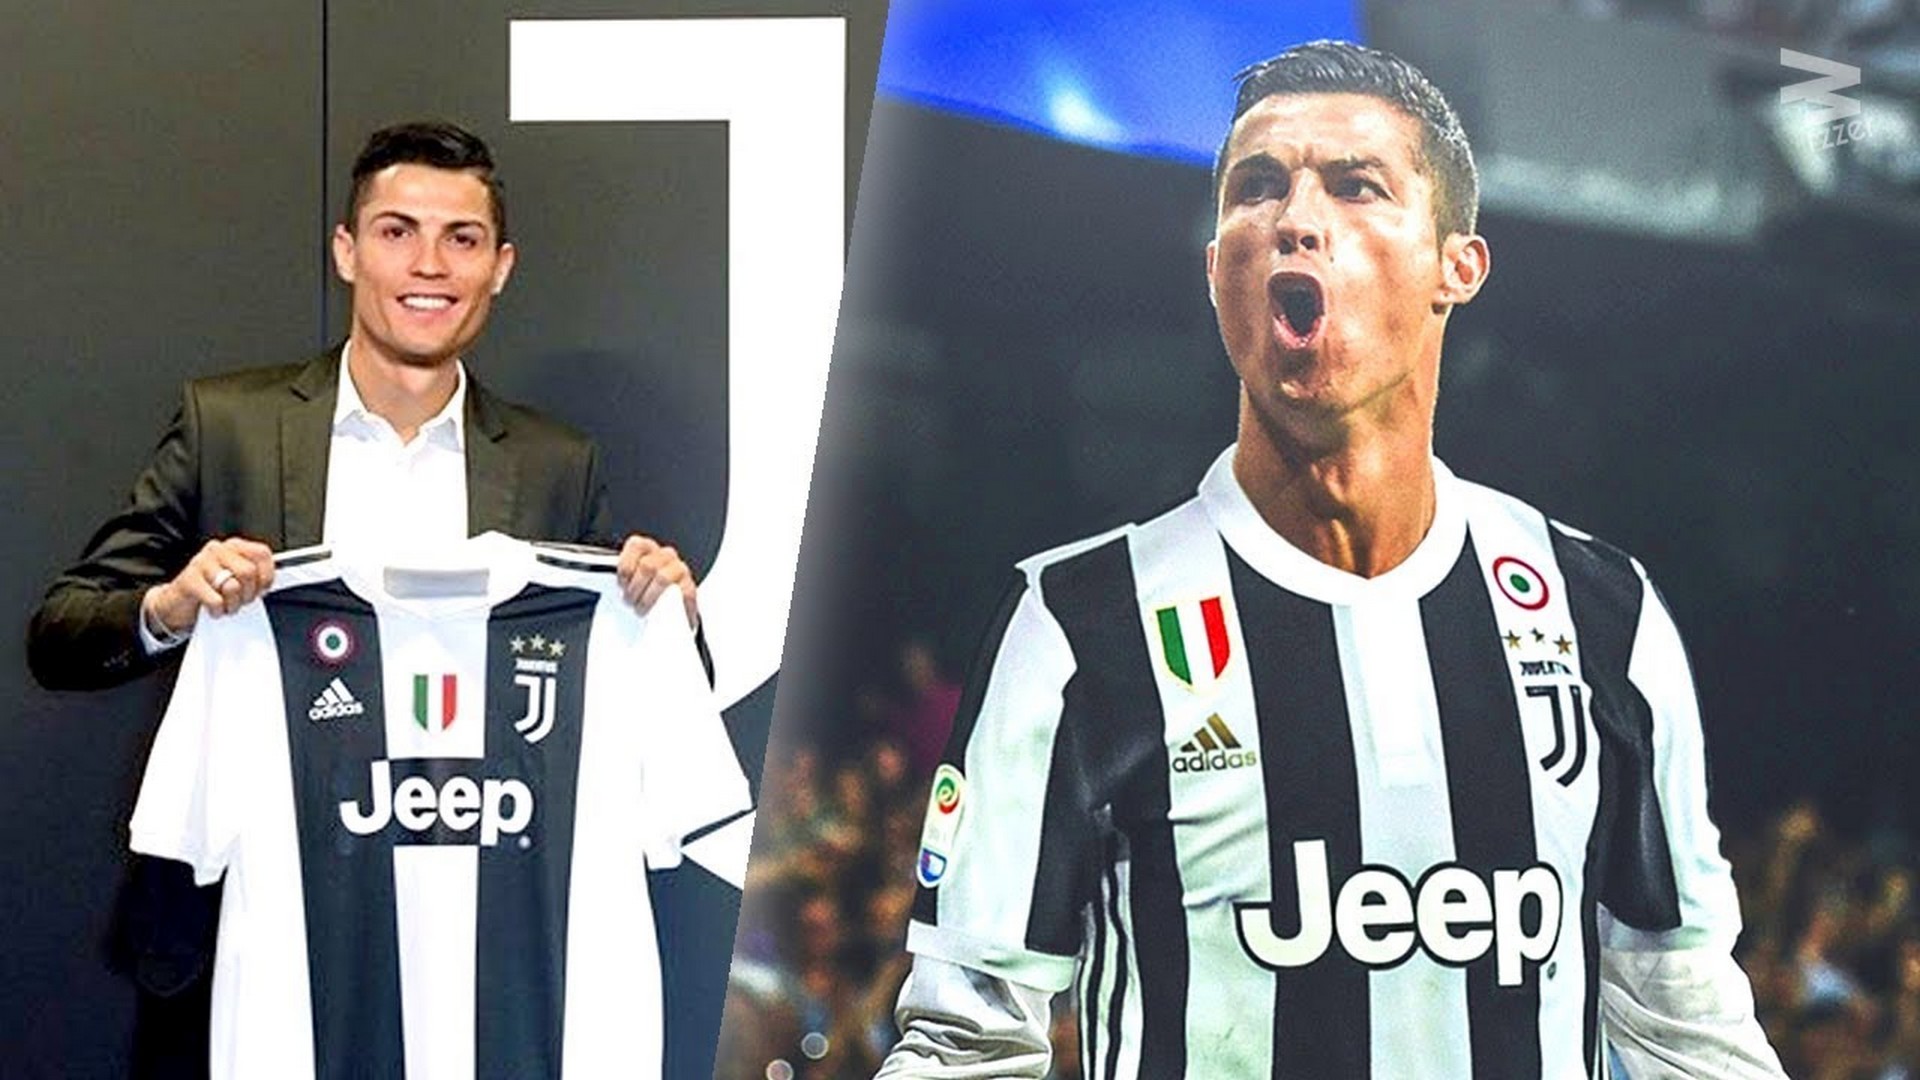 Wallpaper C Ronaldo Juventus HD With Resolution 1920X1080 pixel. You can make this wallpaper for your Desktop Computer Backgrounds, Mac Wallpapers, Android Lock screen or iPhone Screensavers